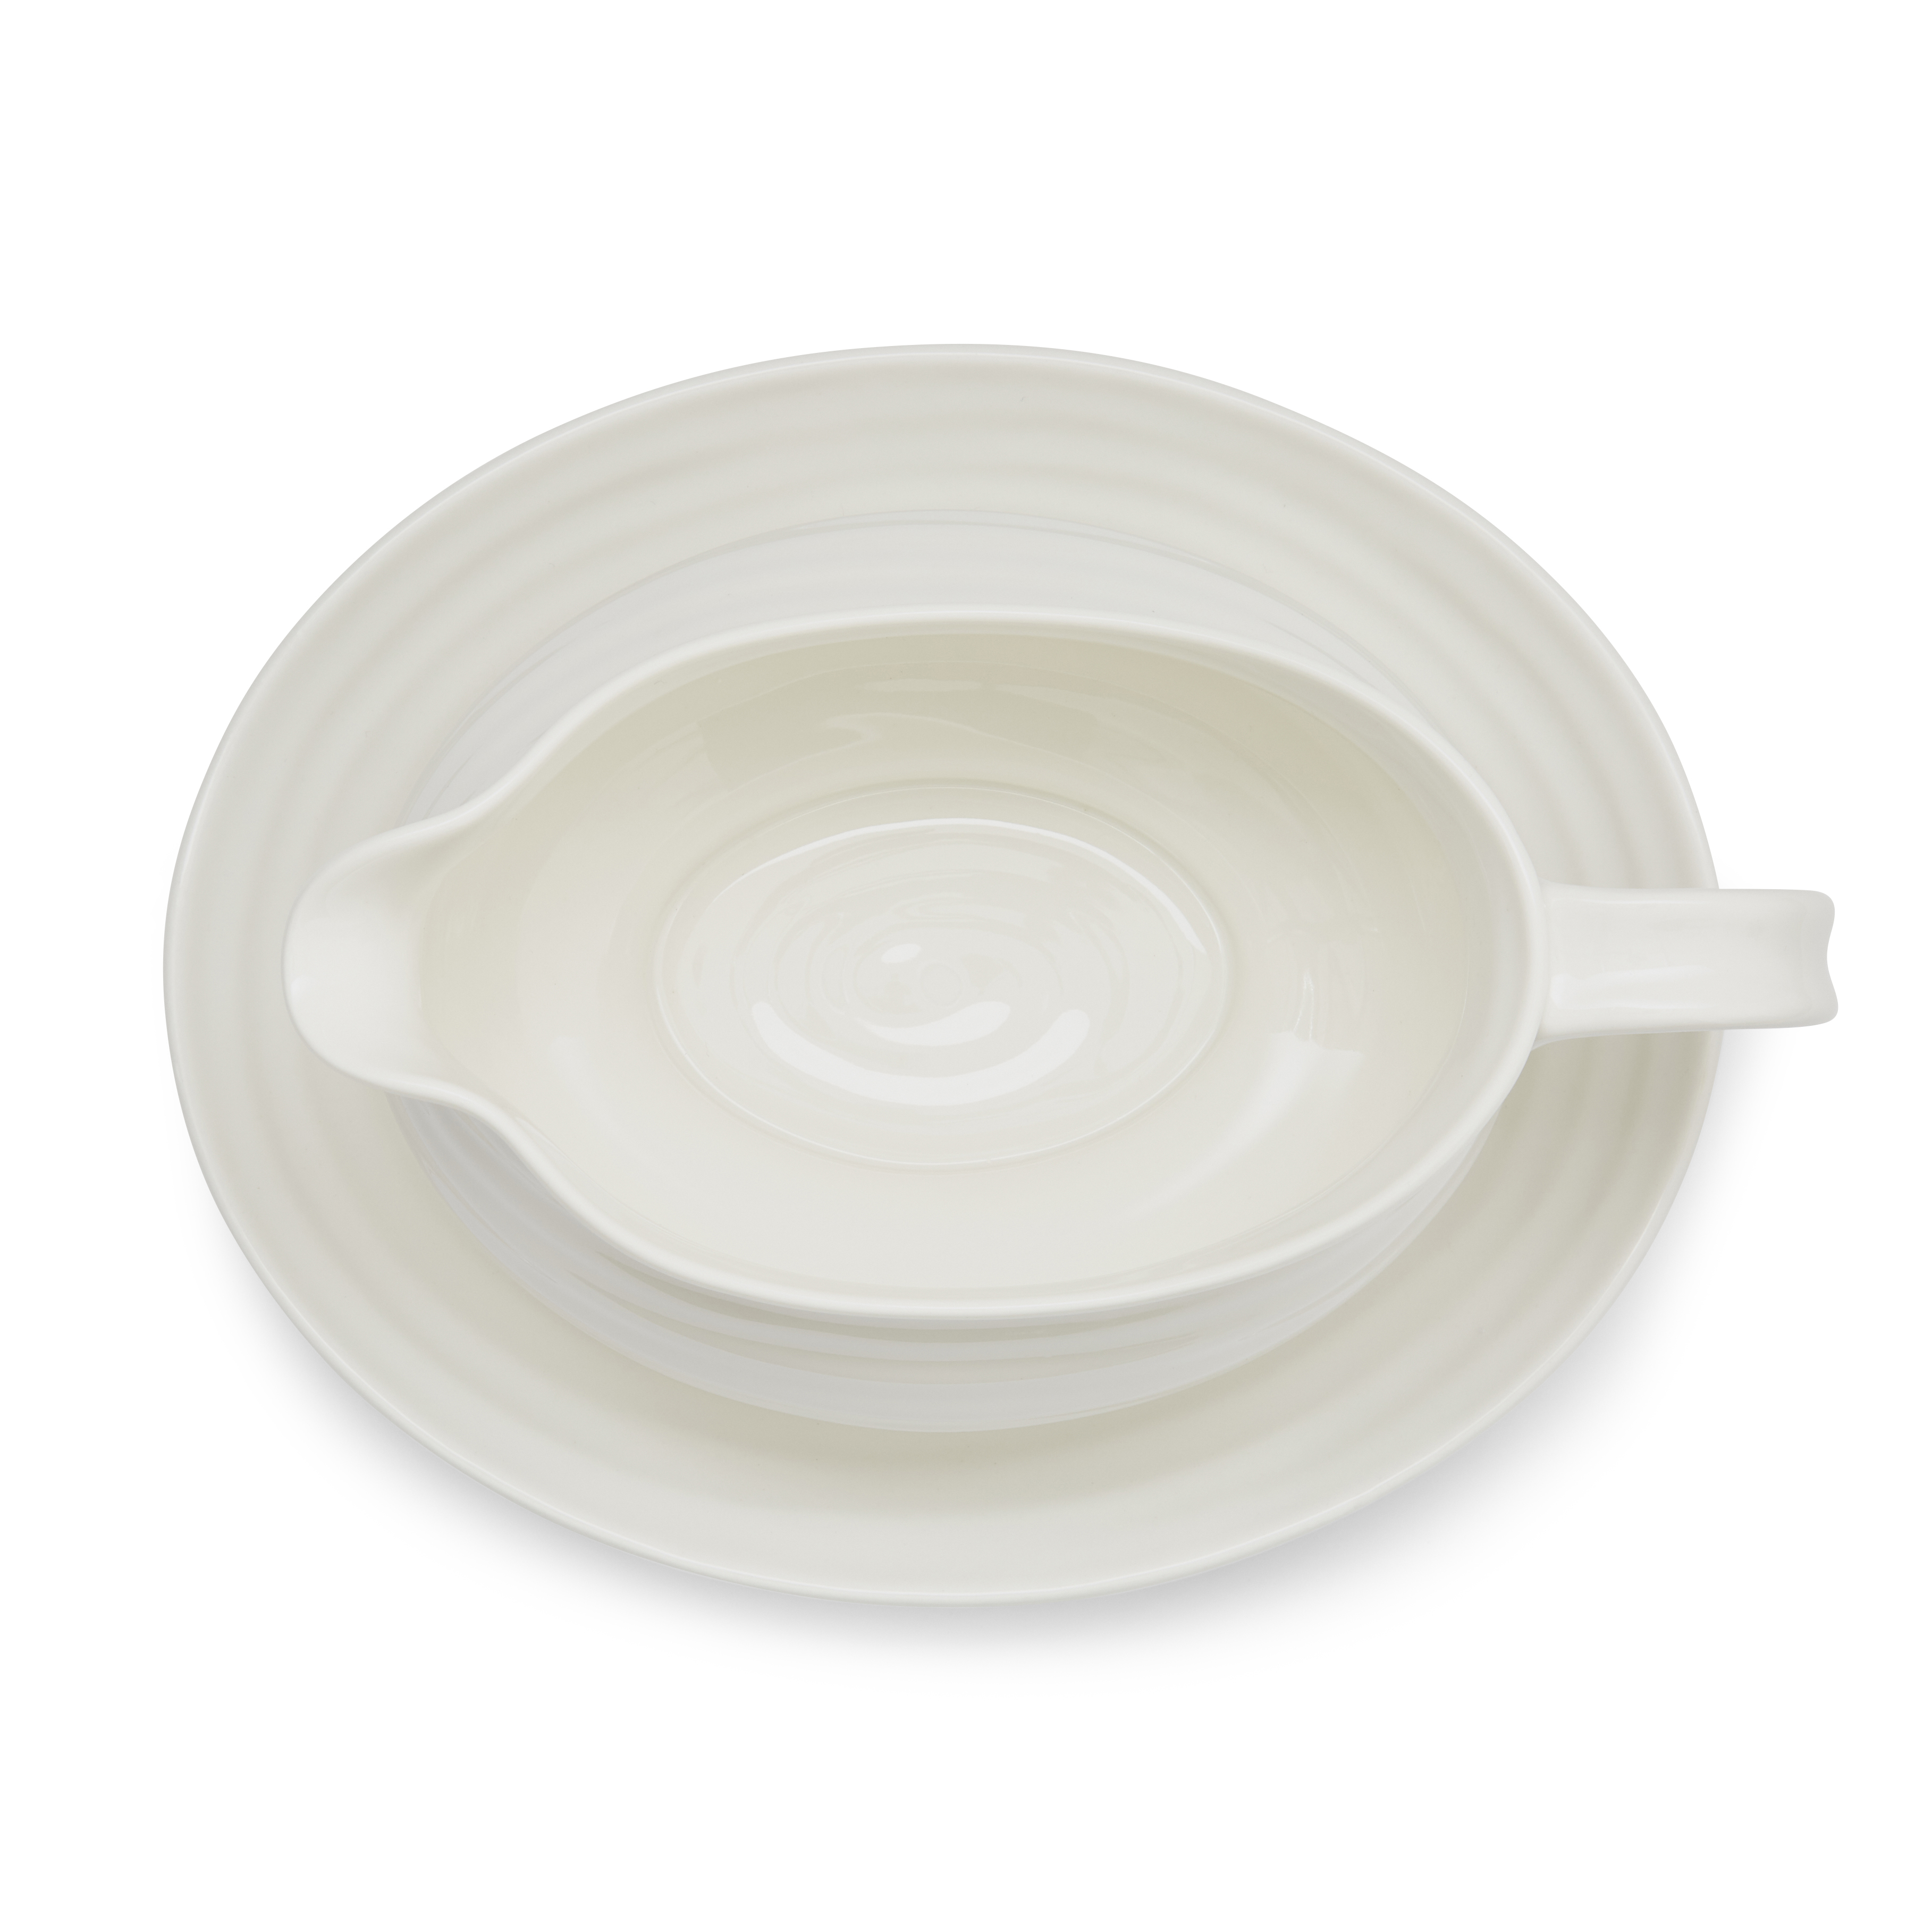 Sophie Conran White Gravy Boat and Stand image number null